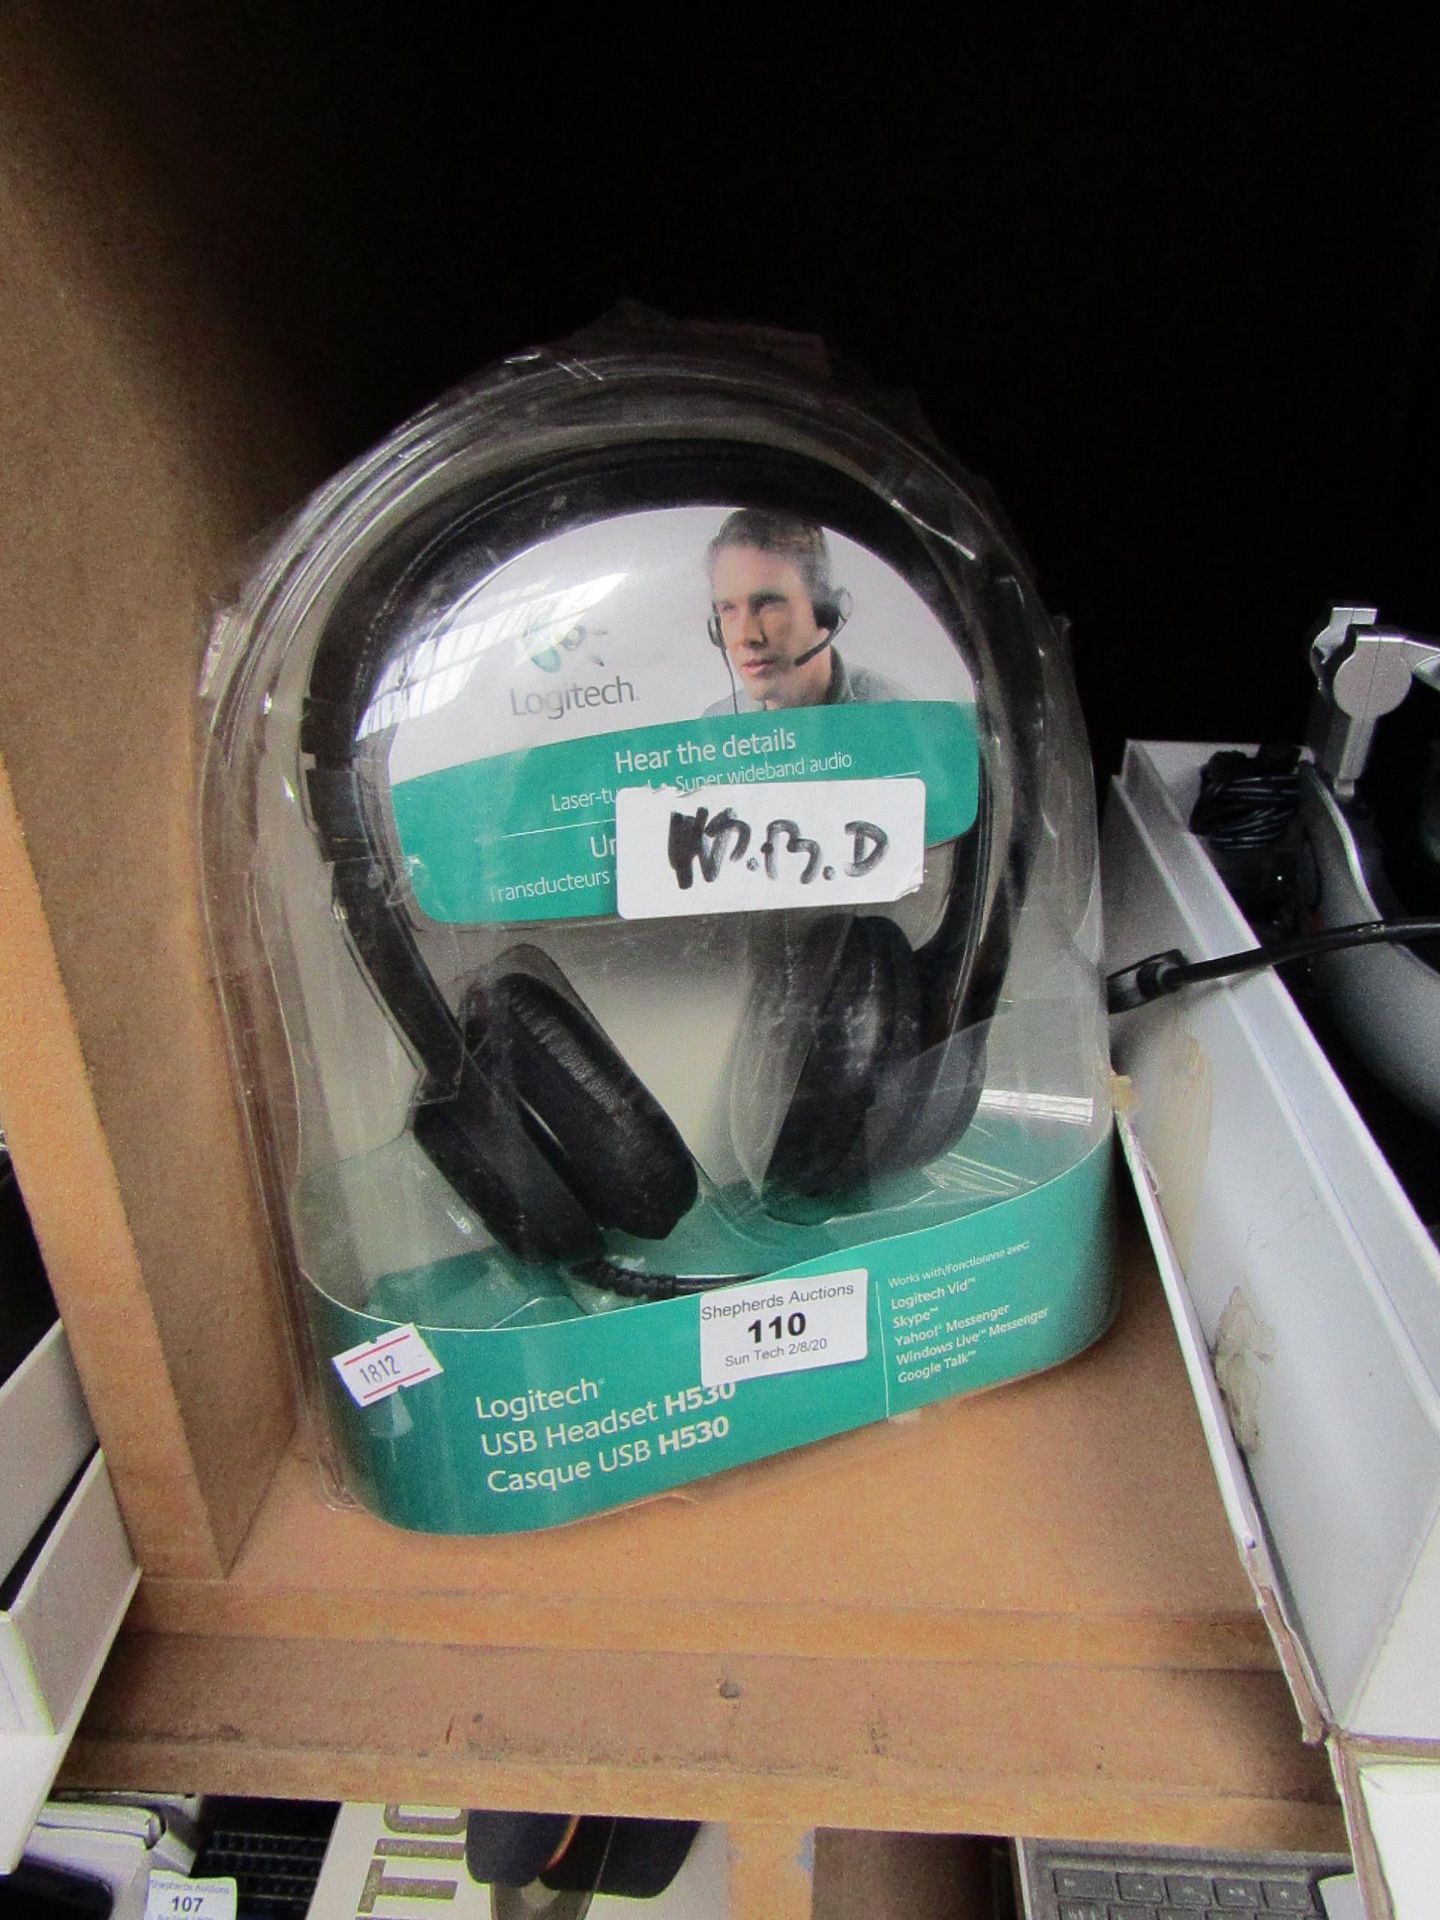 Logitech USB headset H530, unchecked and boxed.